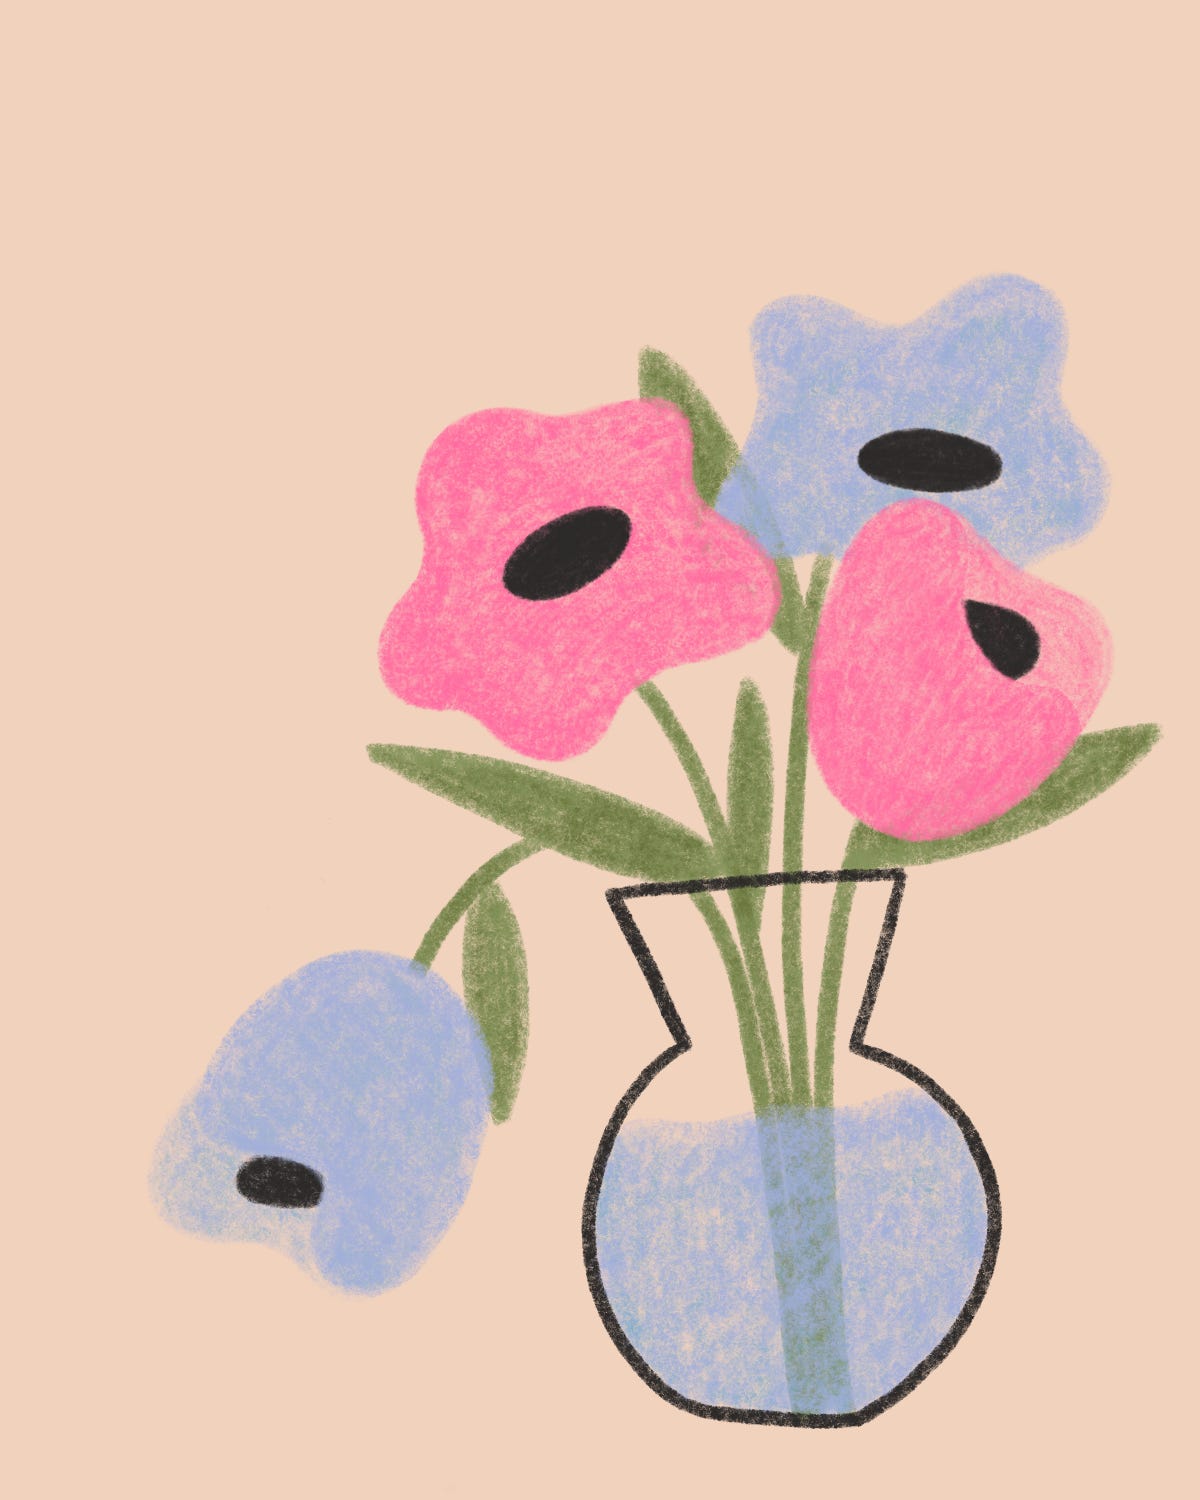  On a blank background is a vase, the outline in thick black pencil, it has a funnel-like top that tapers in and the base of the vase is round with a flat button. Inside the vase are four flowers and water. Two pink flowers and two periwinkle flowers with black centers. One of the light blue flowers is tilted downwards. All the flowers have olive green stems.